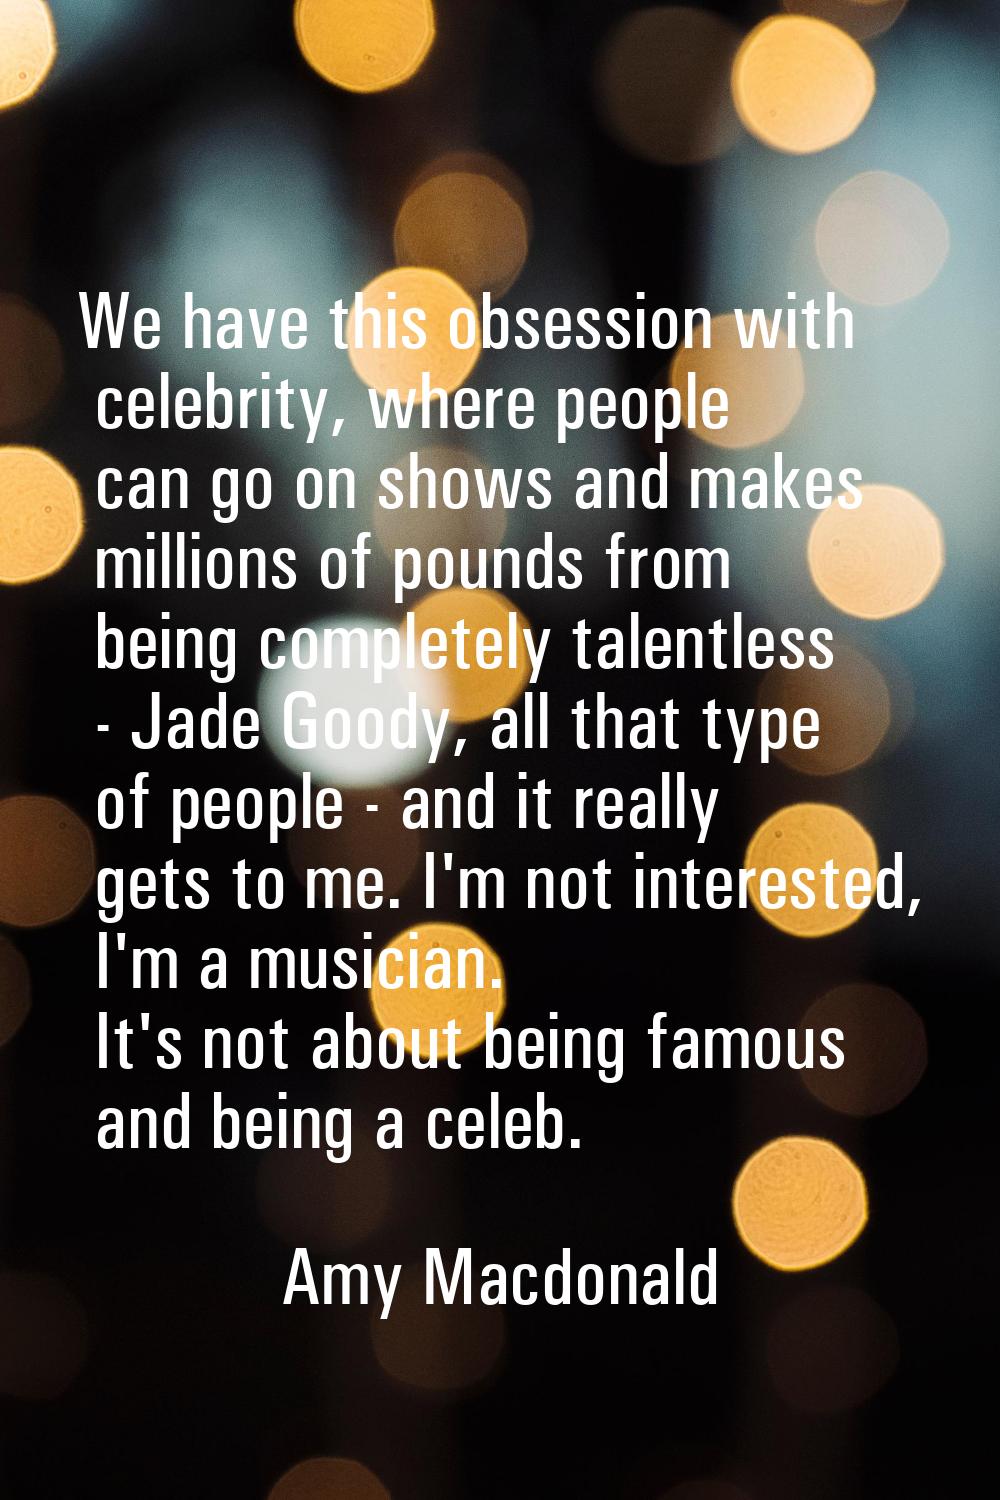 We have this obsession with celebrity, where people can go on shows and makes millions of pounds fr